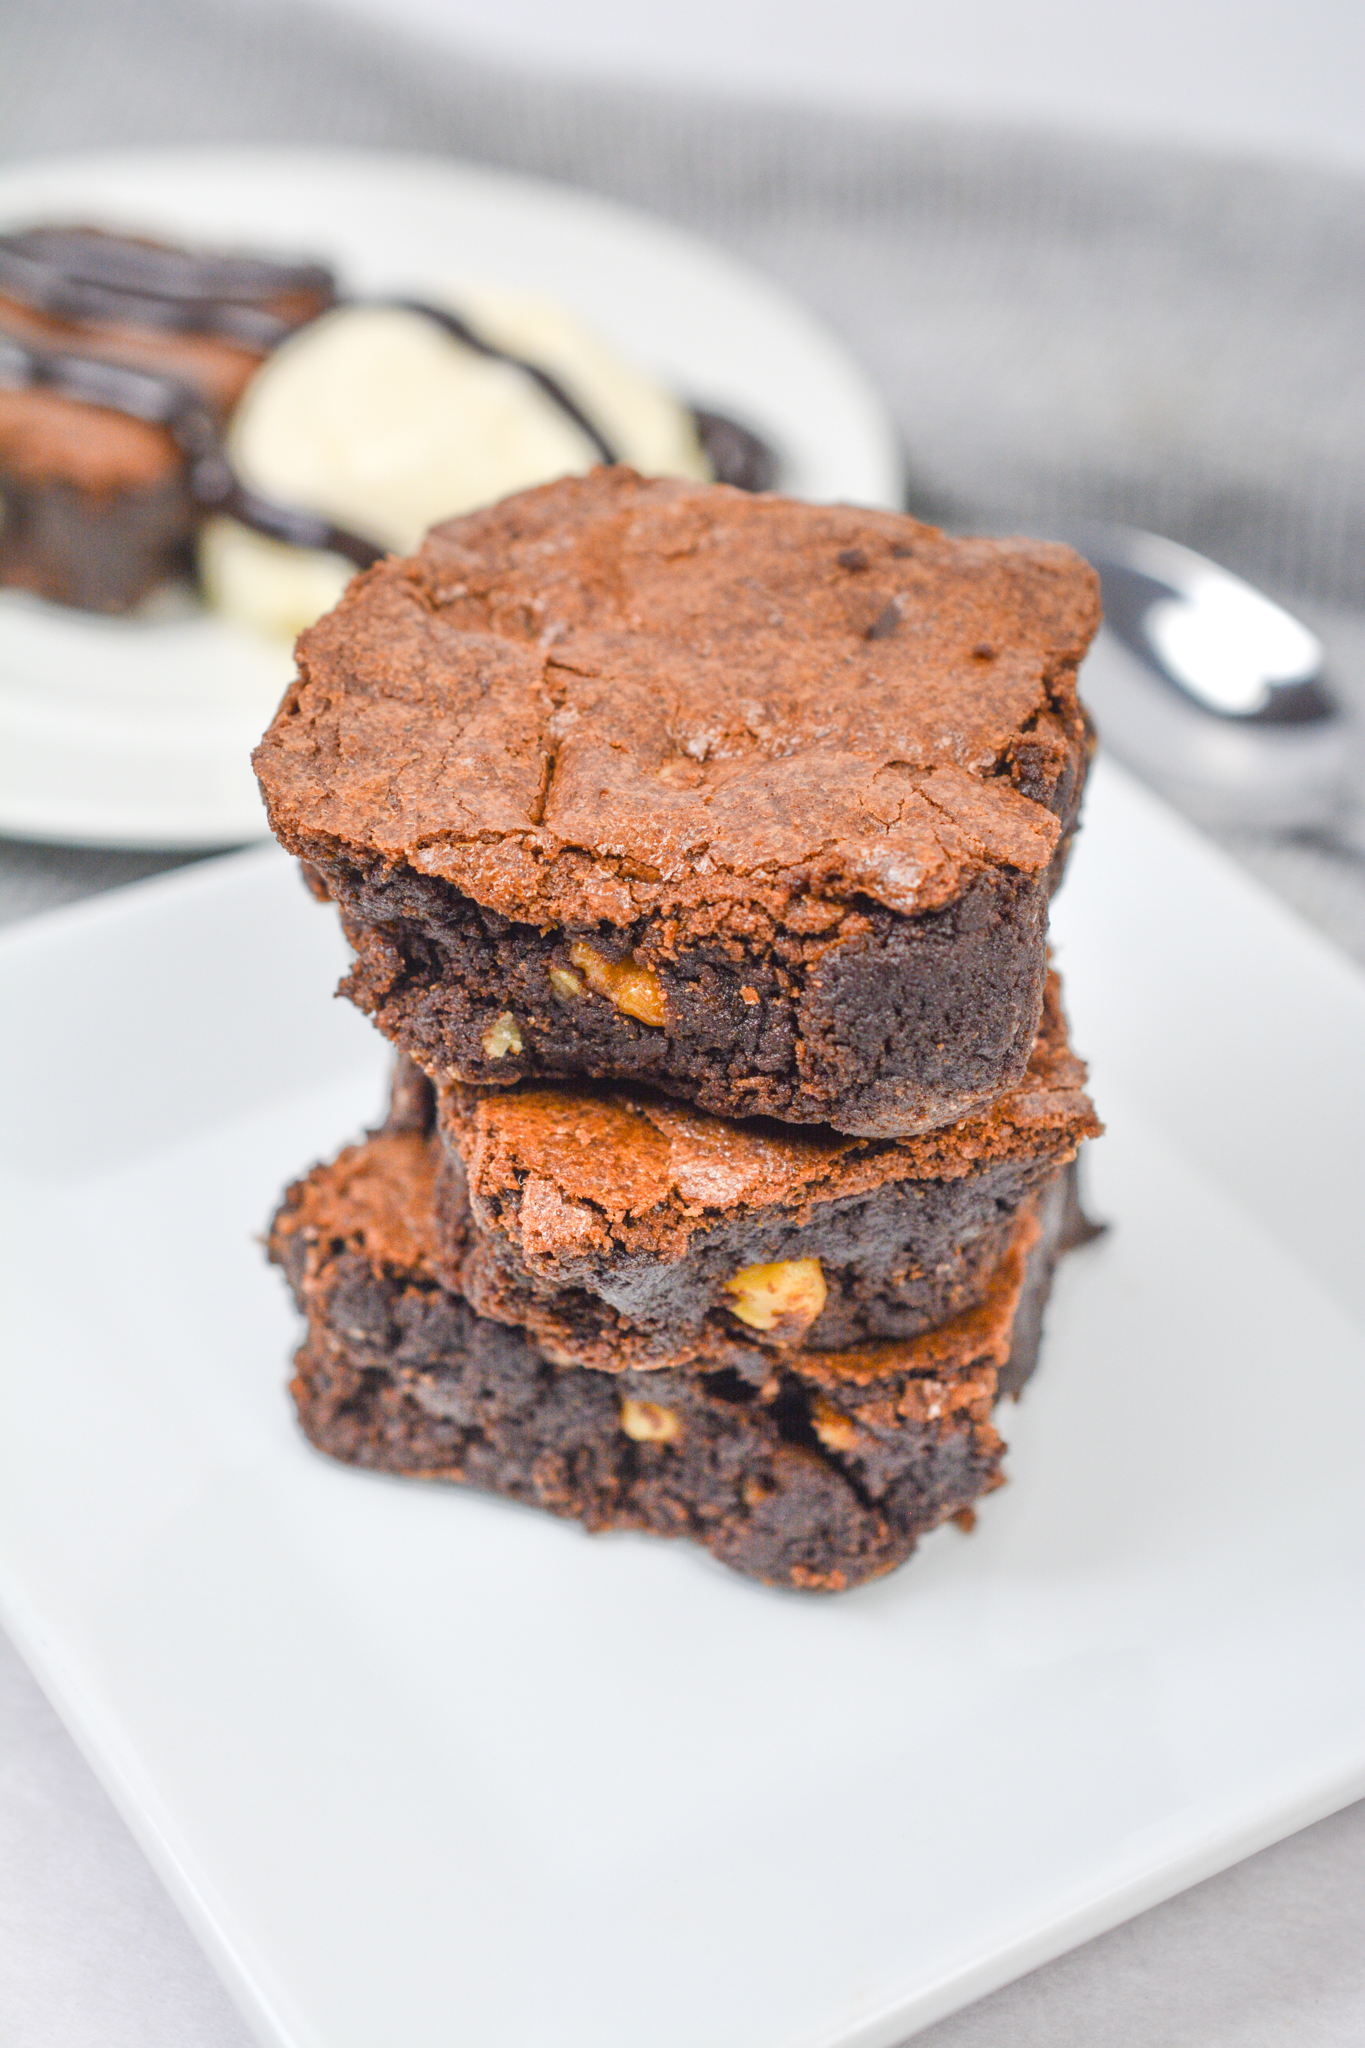 Chocolate Brownies from scratch with Walnuts